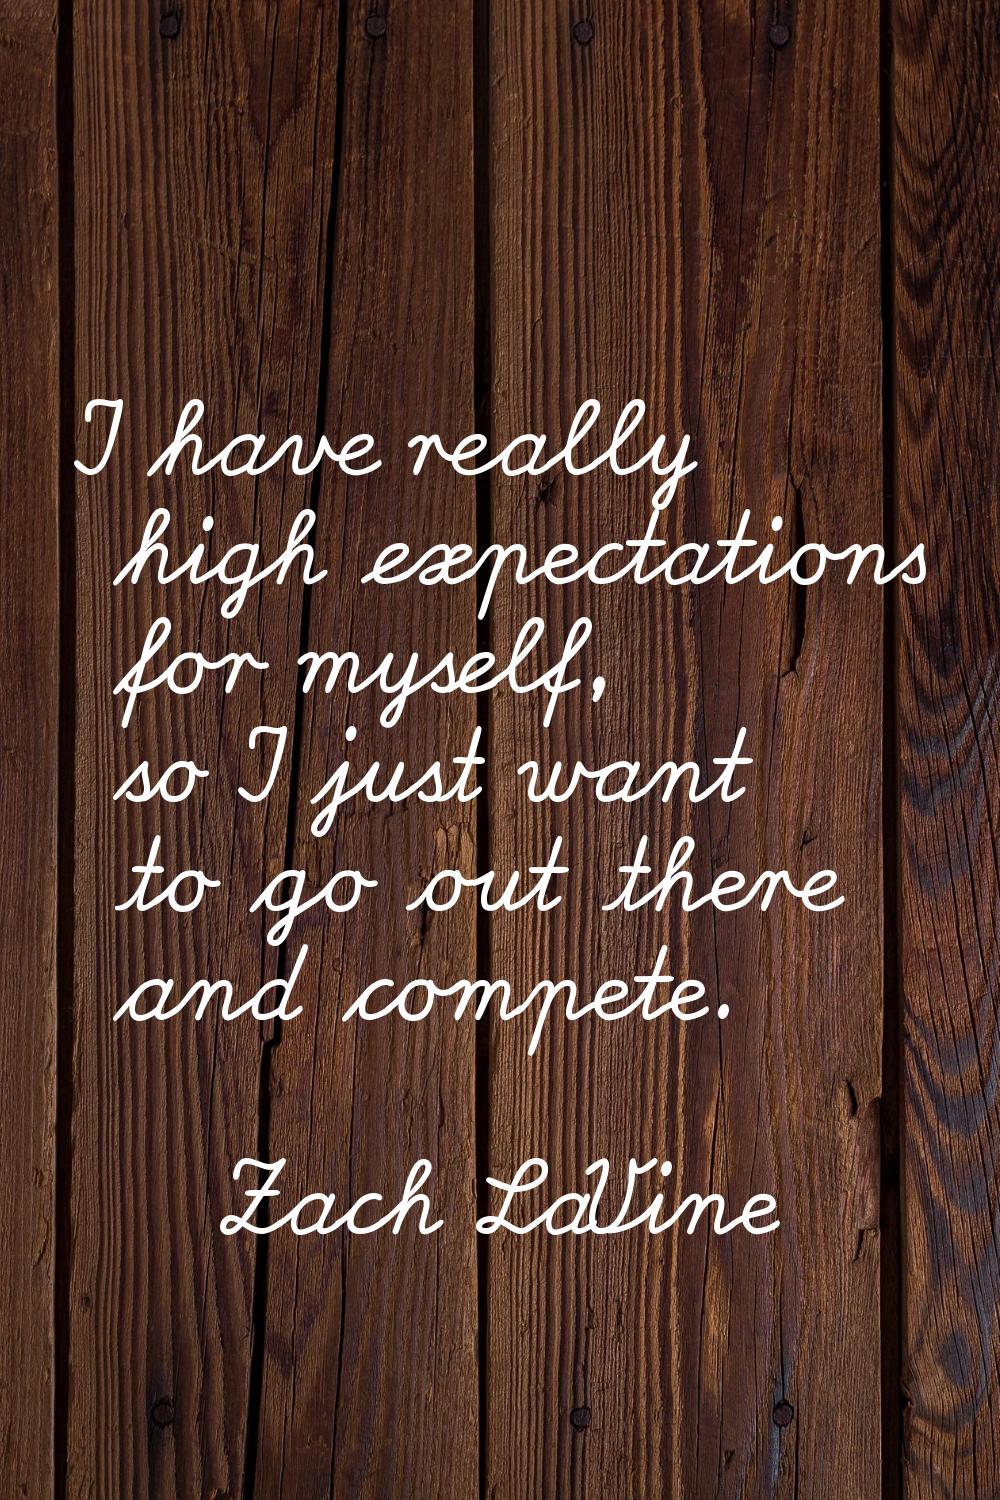 I have really high expectations for myself, so I just want to go out there and compete.